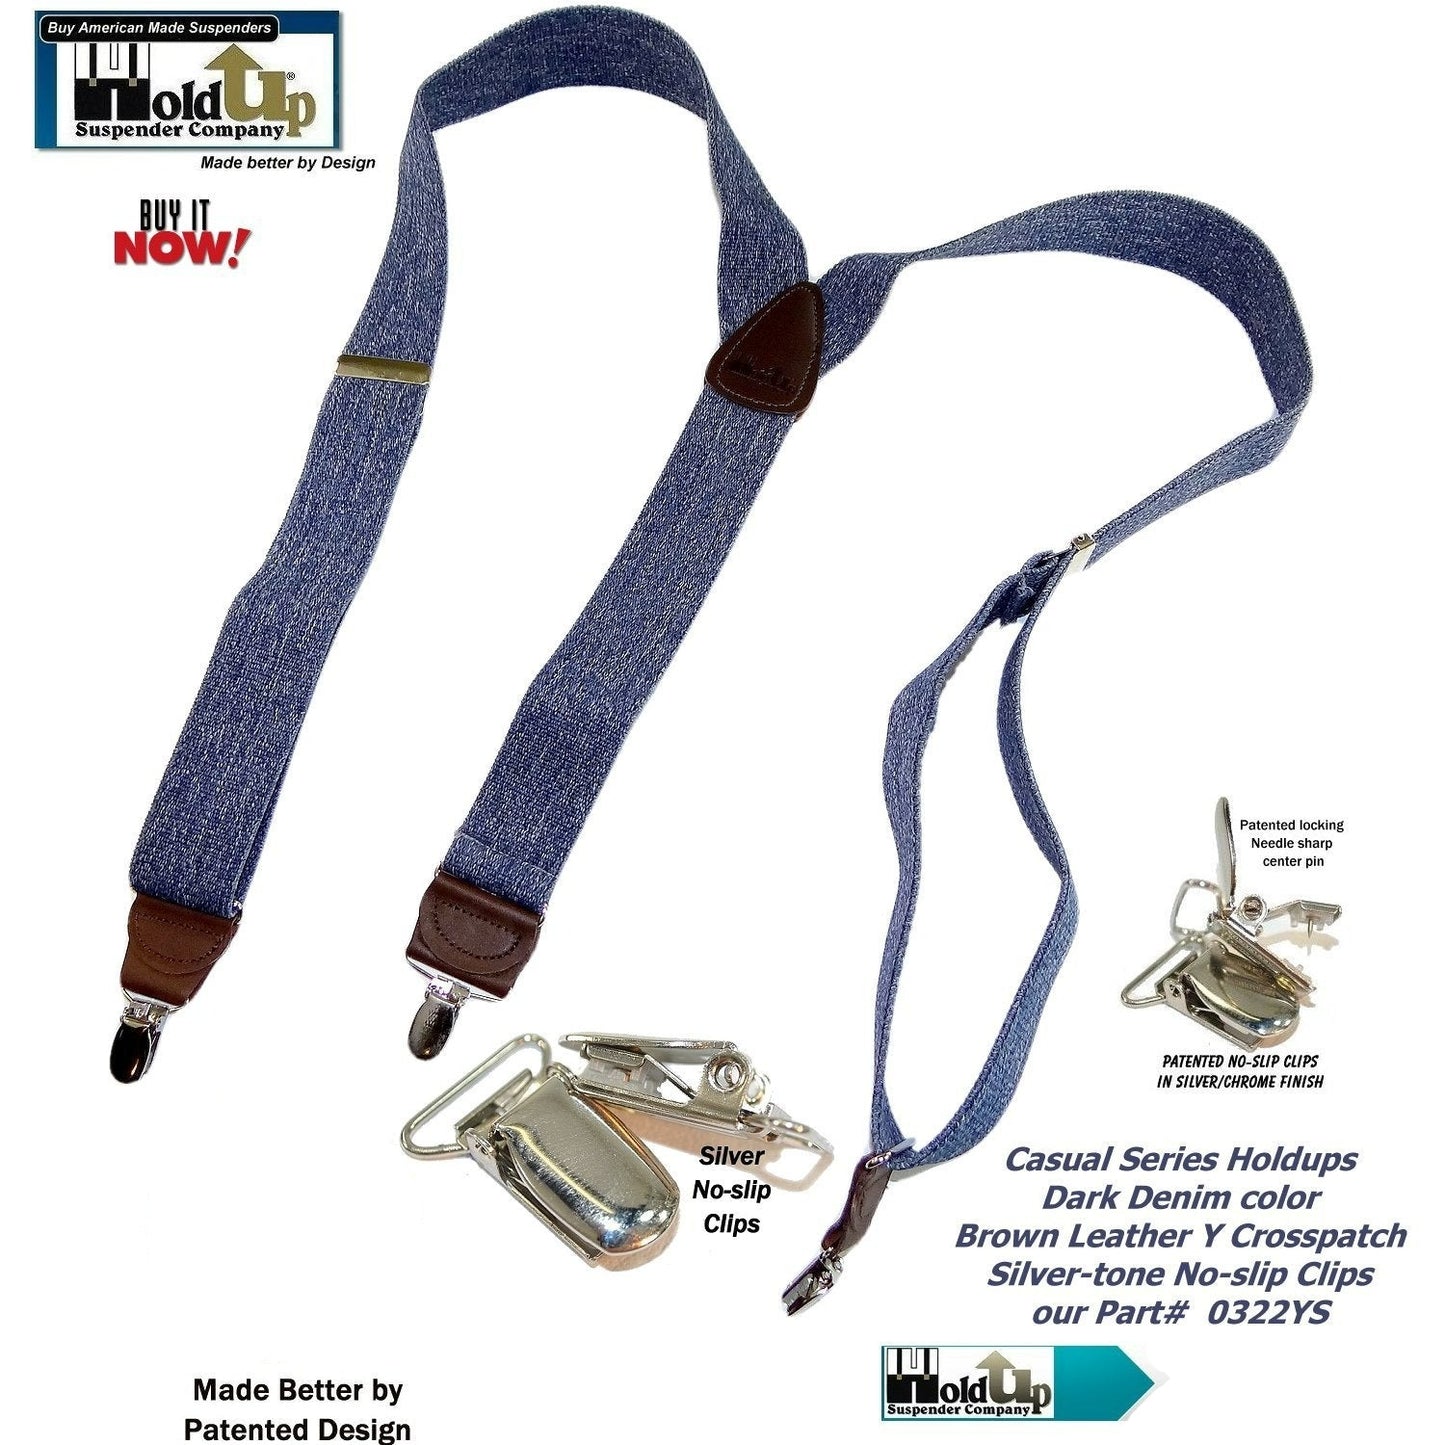 Holdup Brand Dark Denim Casual Series Suspenders are 1 1/2" wide with Y-back style and Patented No-slip Silver Clips